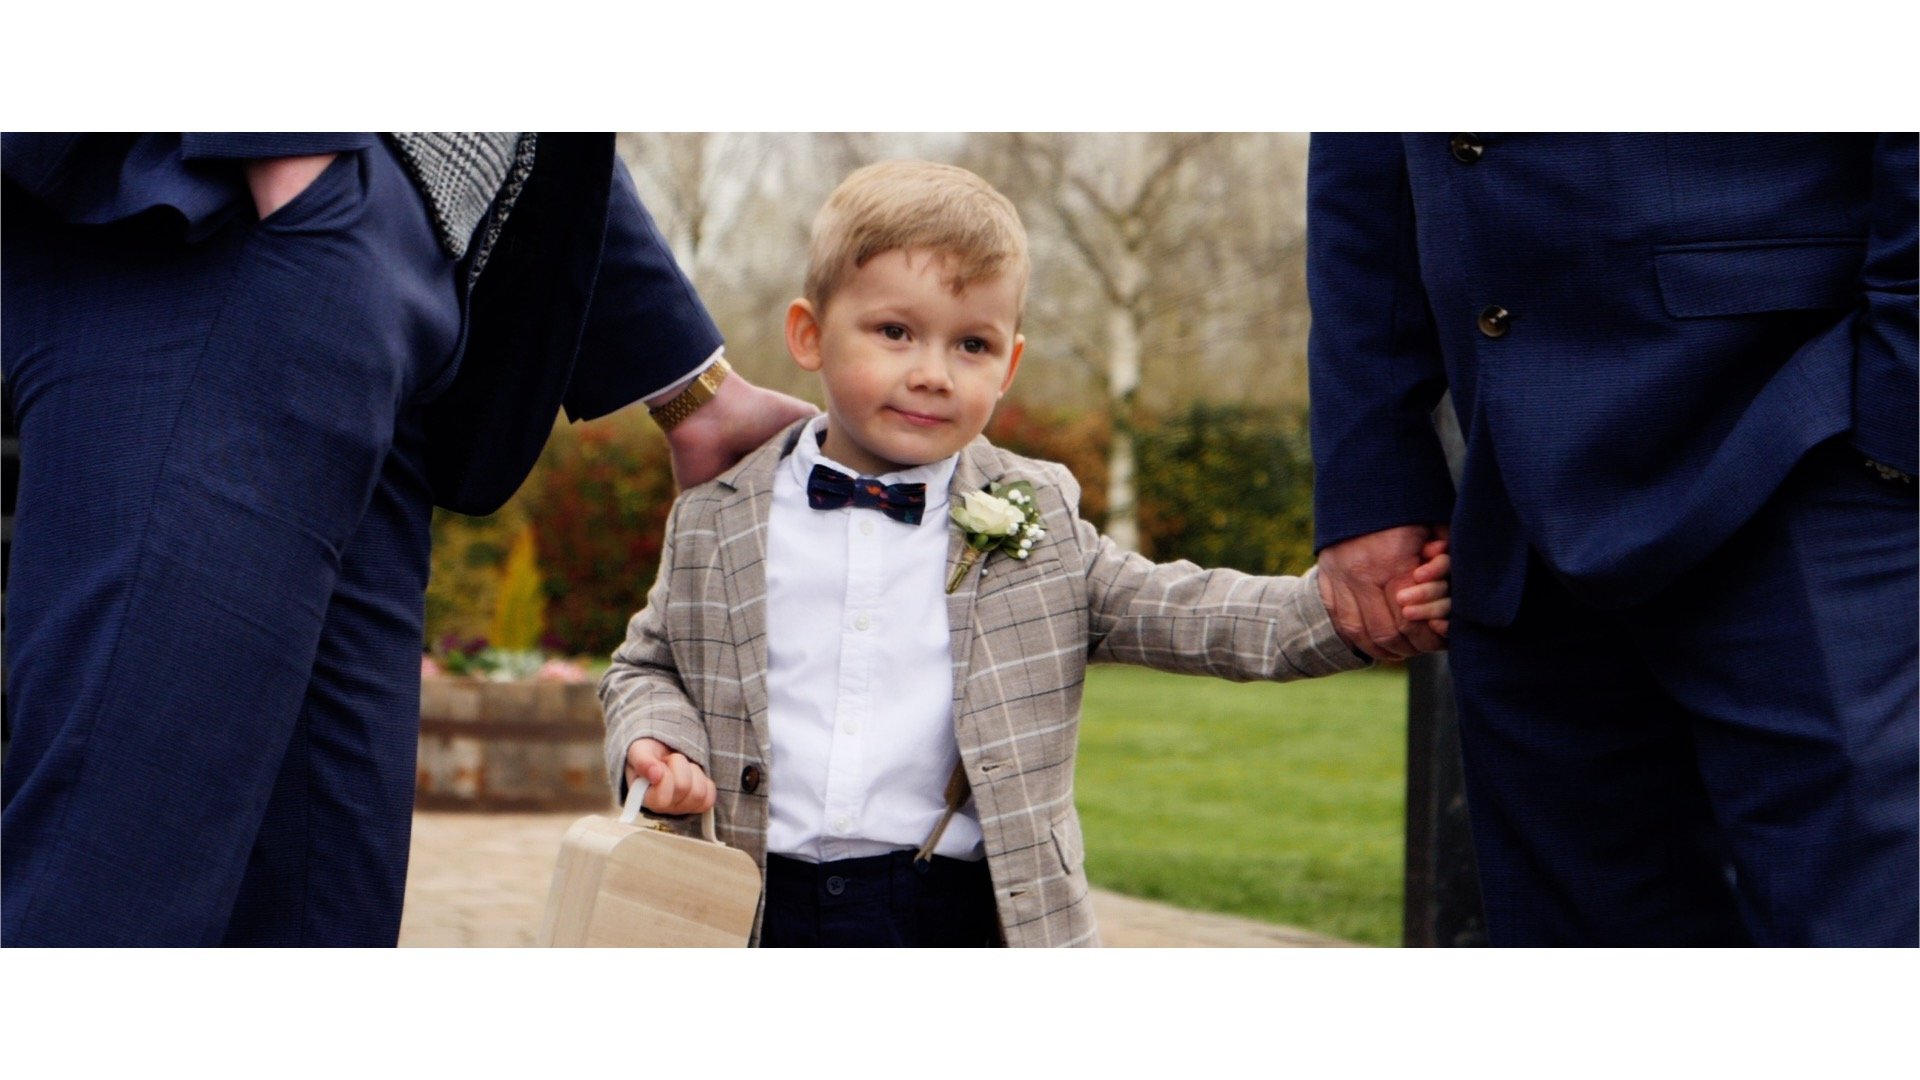 Pageboy at wedding with rings video.jpg